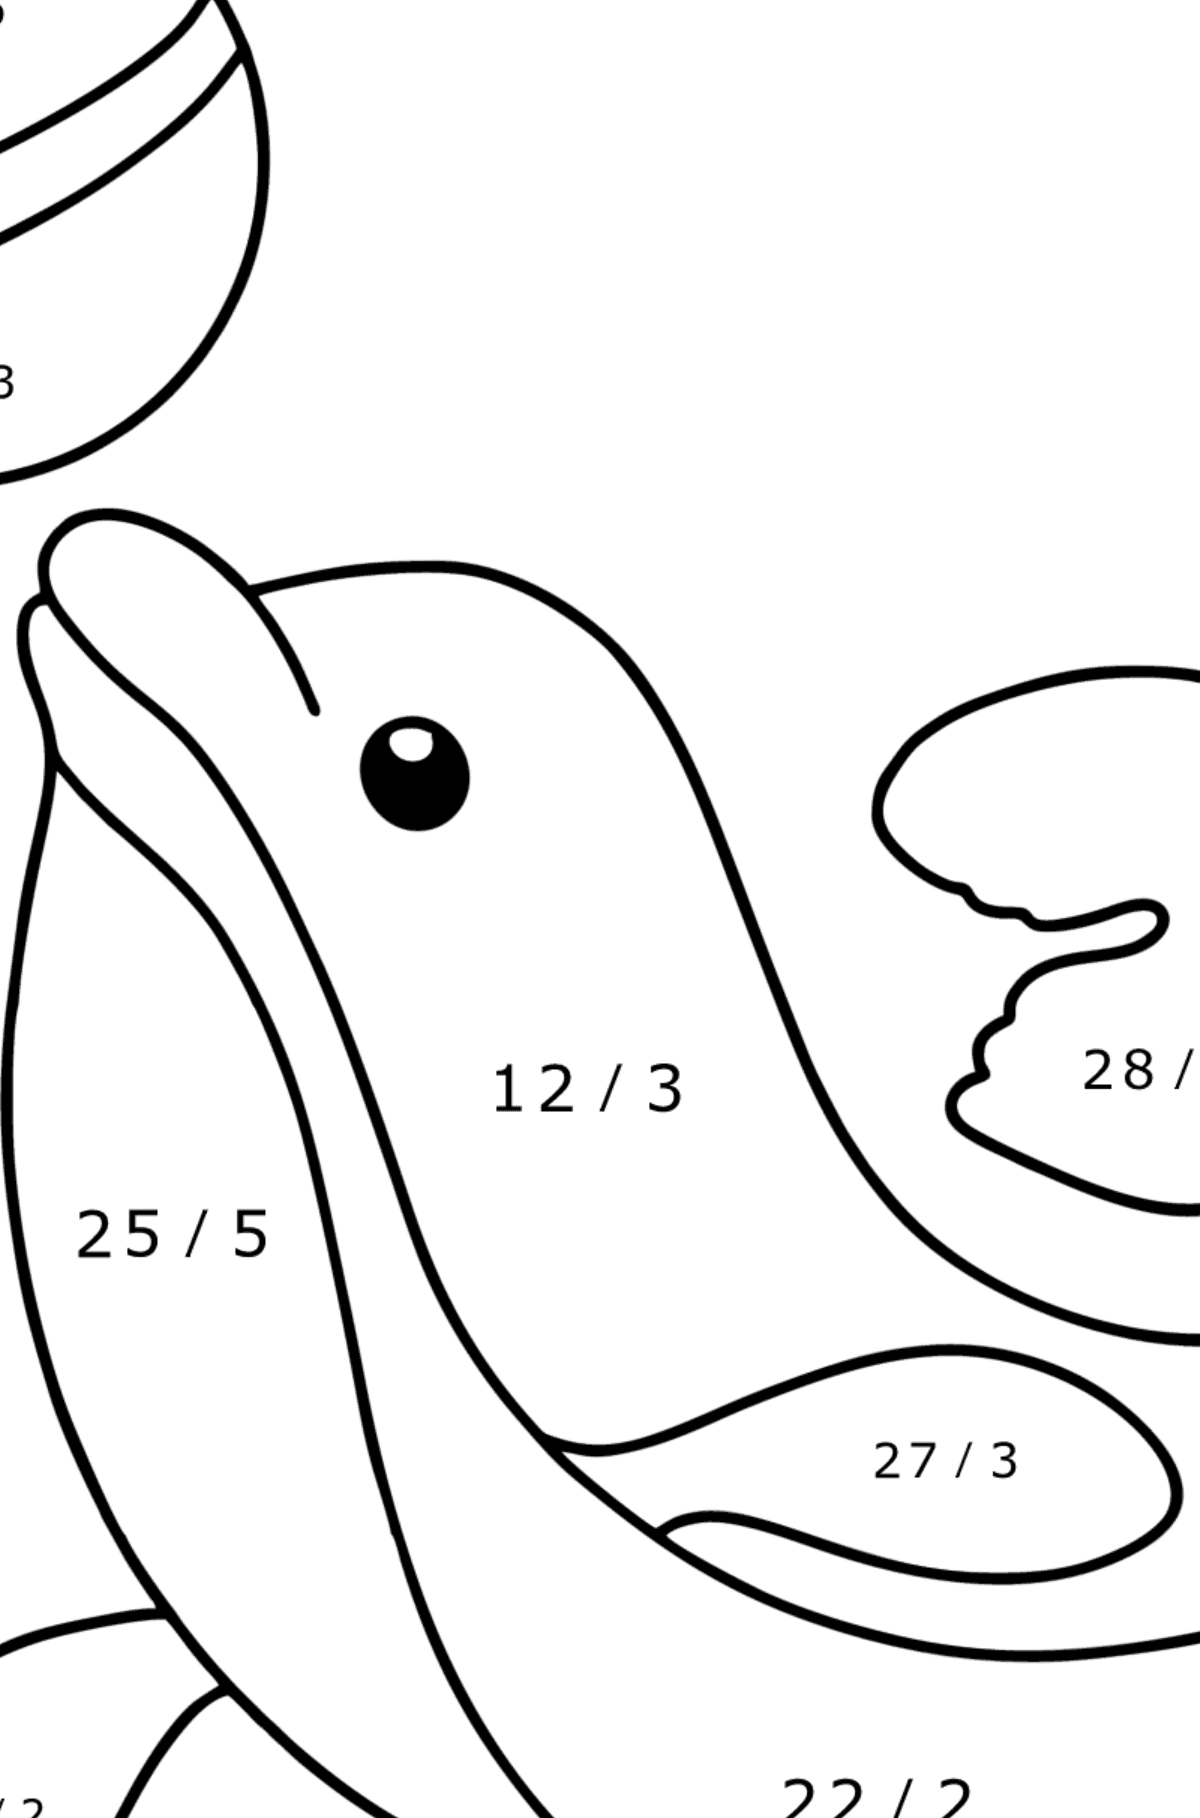 Dolphin is Performing coloring page - Math Coloring - Division for Kids